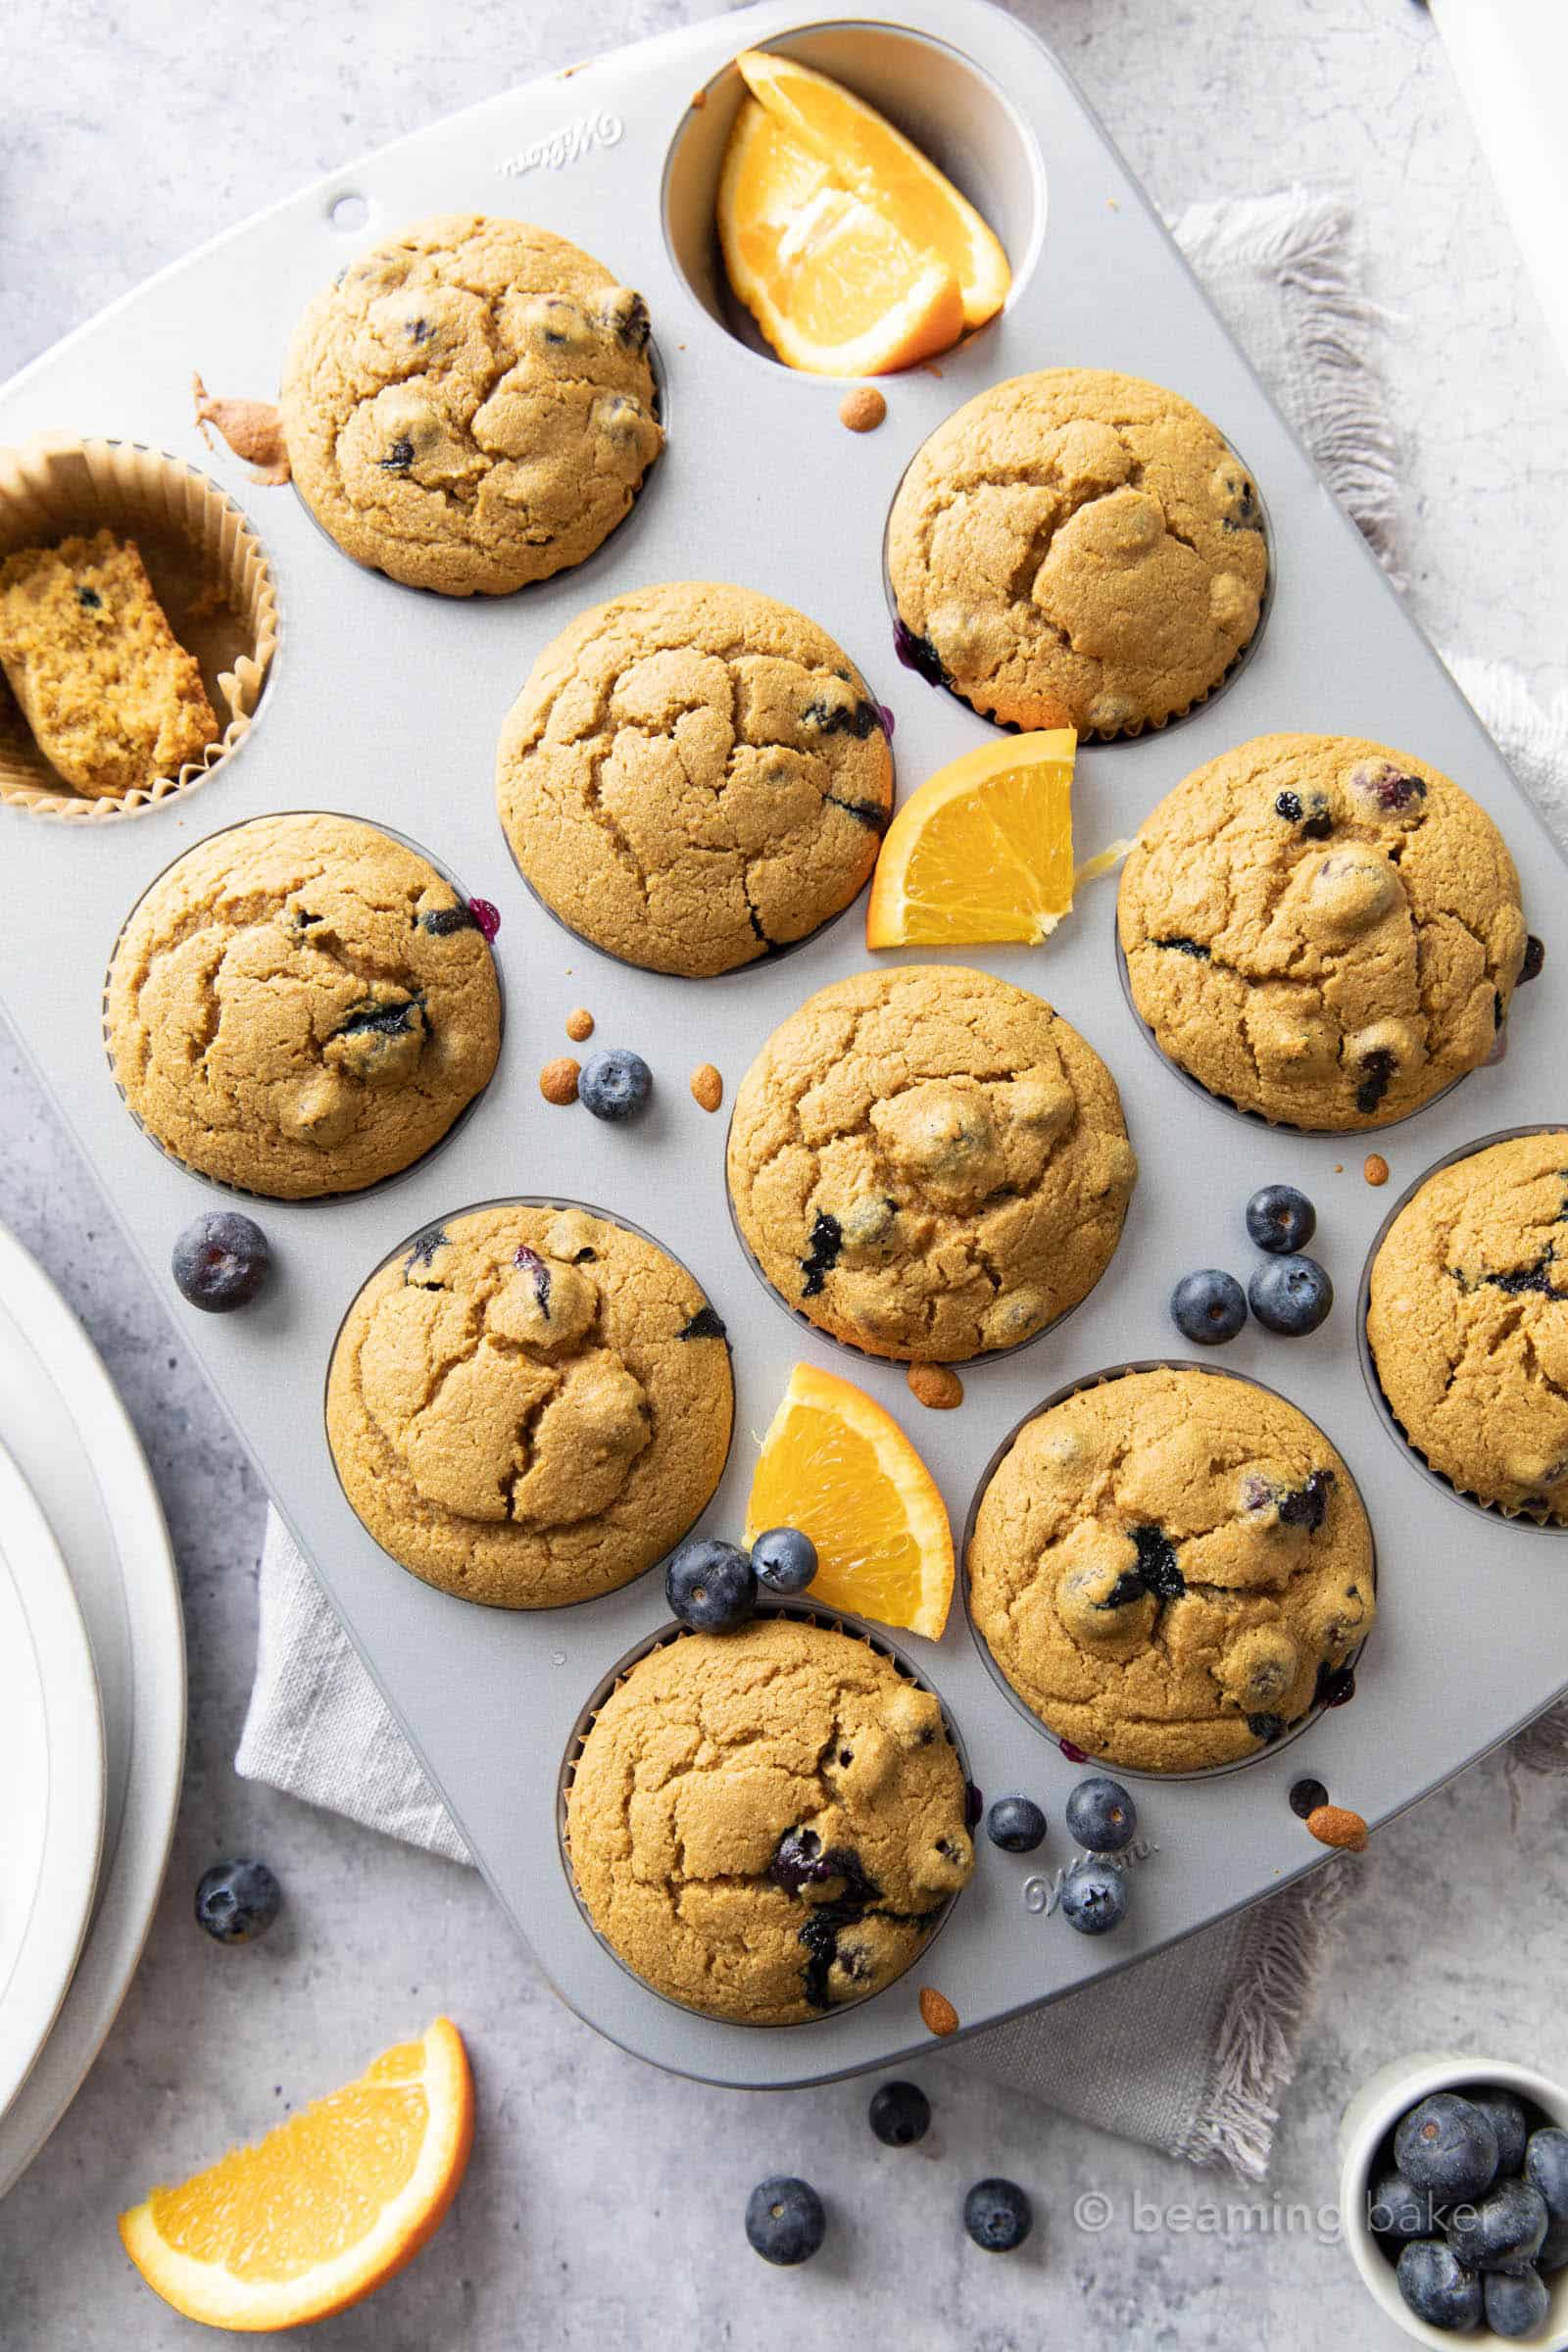 Fresh baked blueberry orange muffins in a metal muffin pan with blueberries and oranges